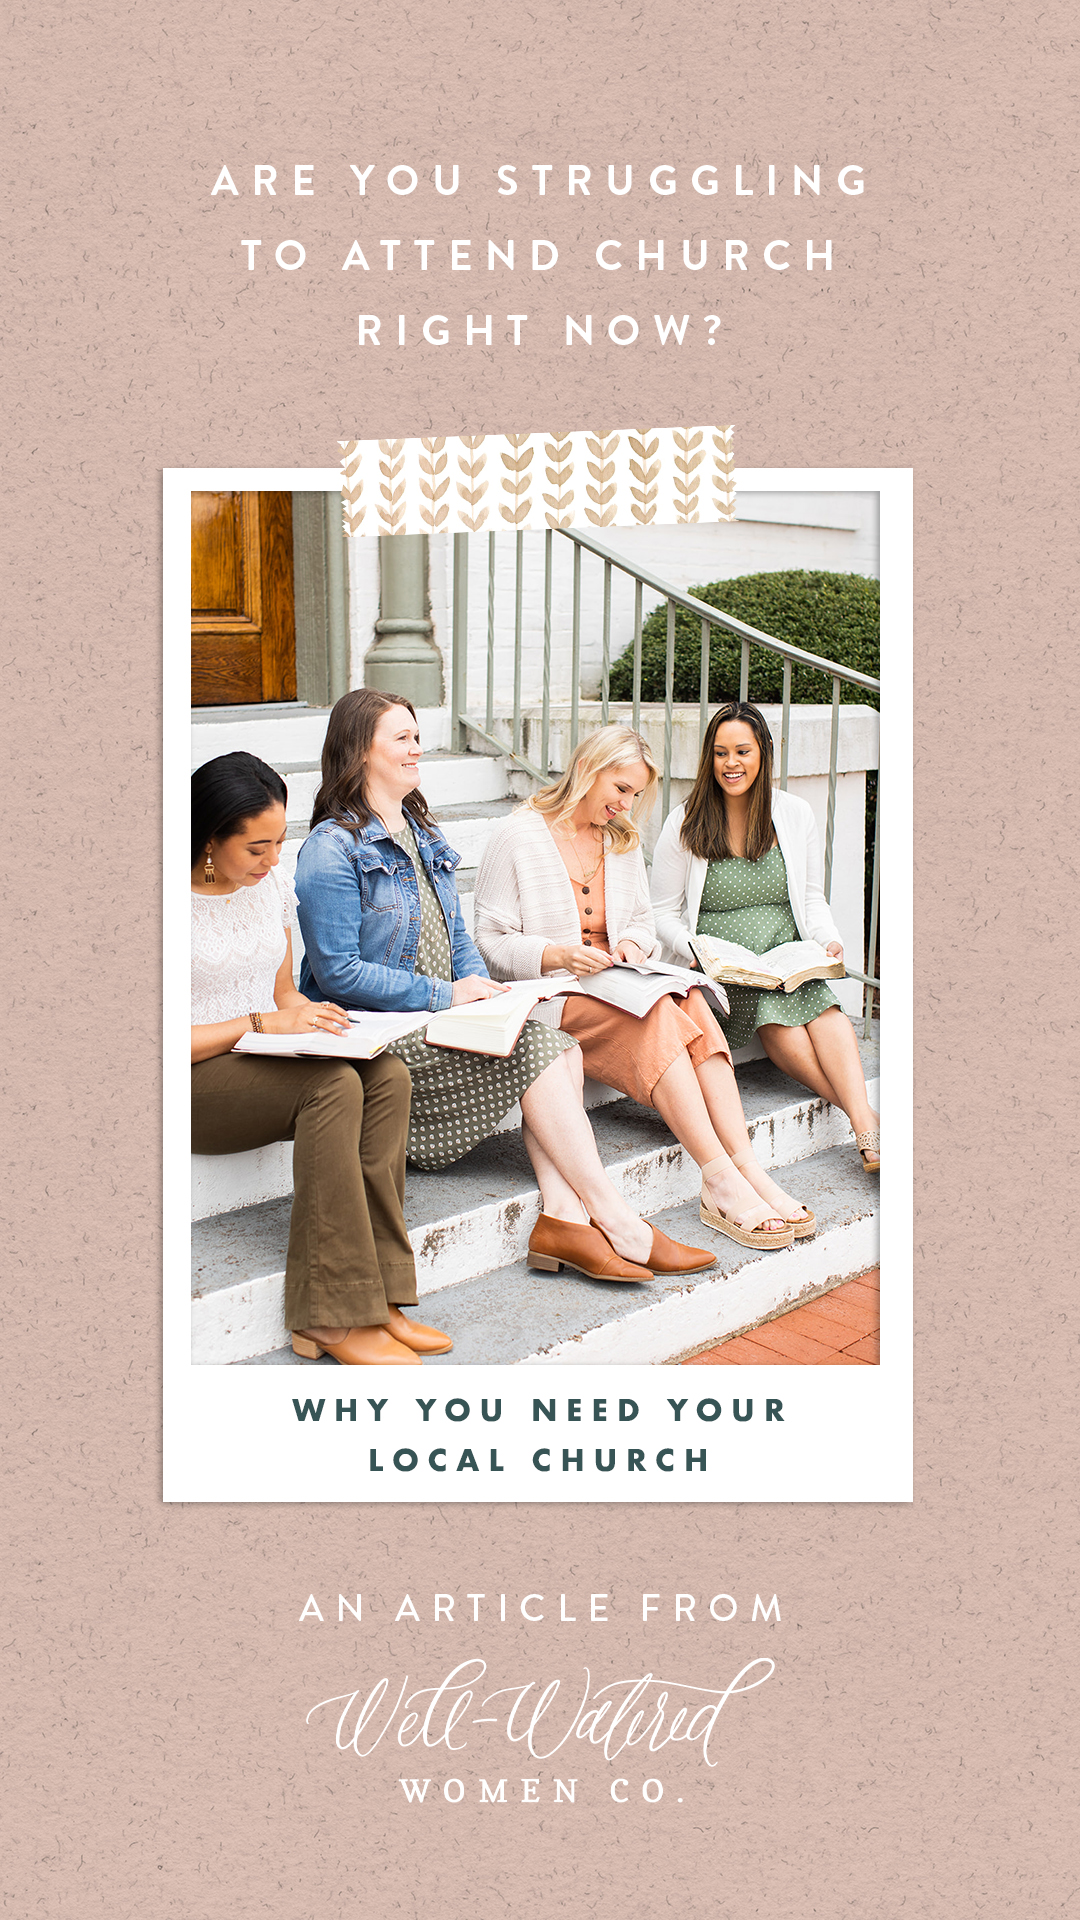 Why You Need Your Local Church-An Article by Well-Watered Women